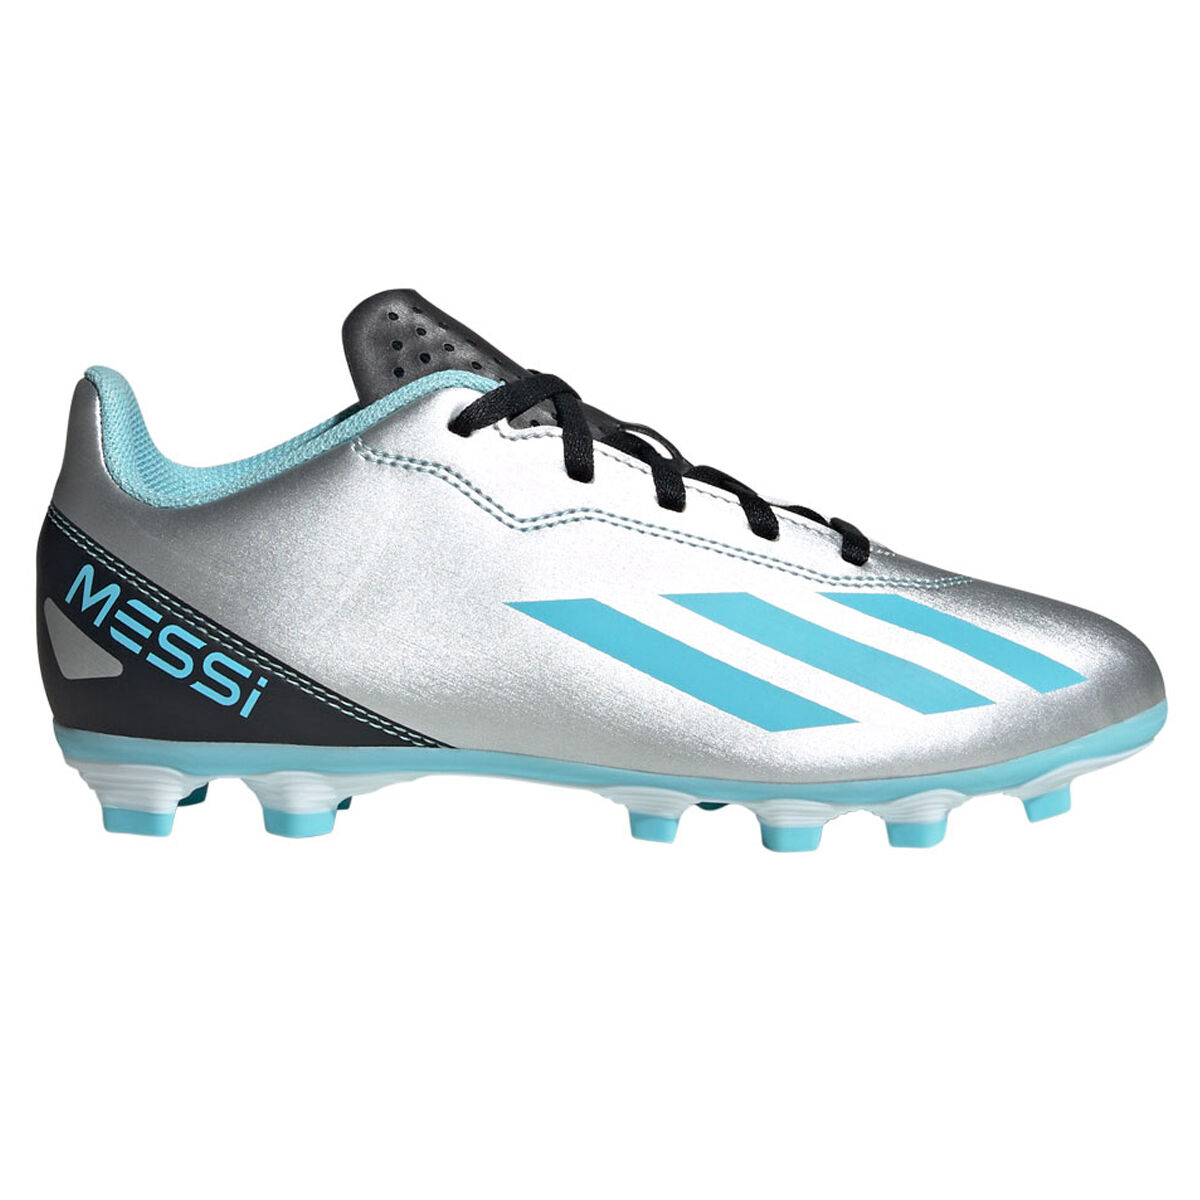 Adidas X Speedflow: Lionel Messi x Adidas X Speedflow Messi.1 FG football  boots: Where to buy, price, and more details explored